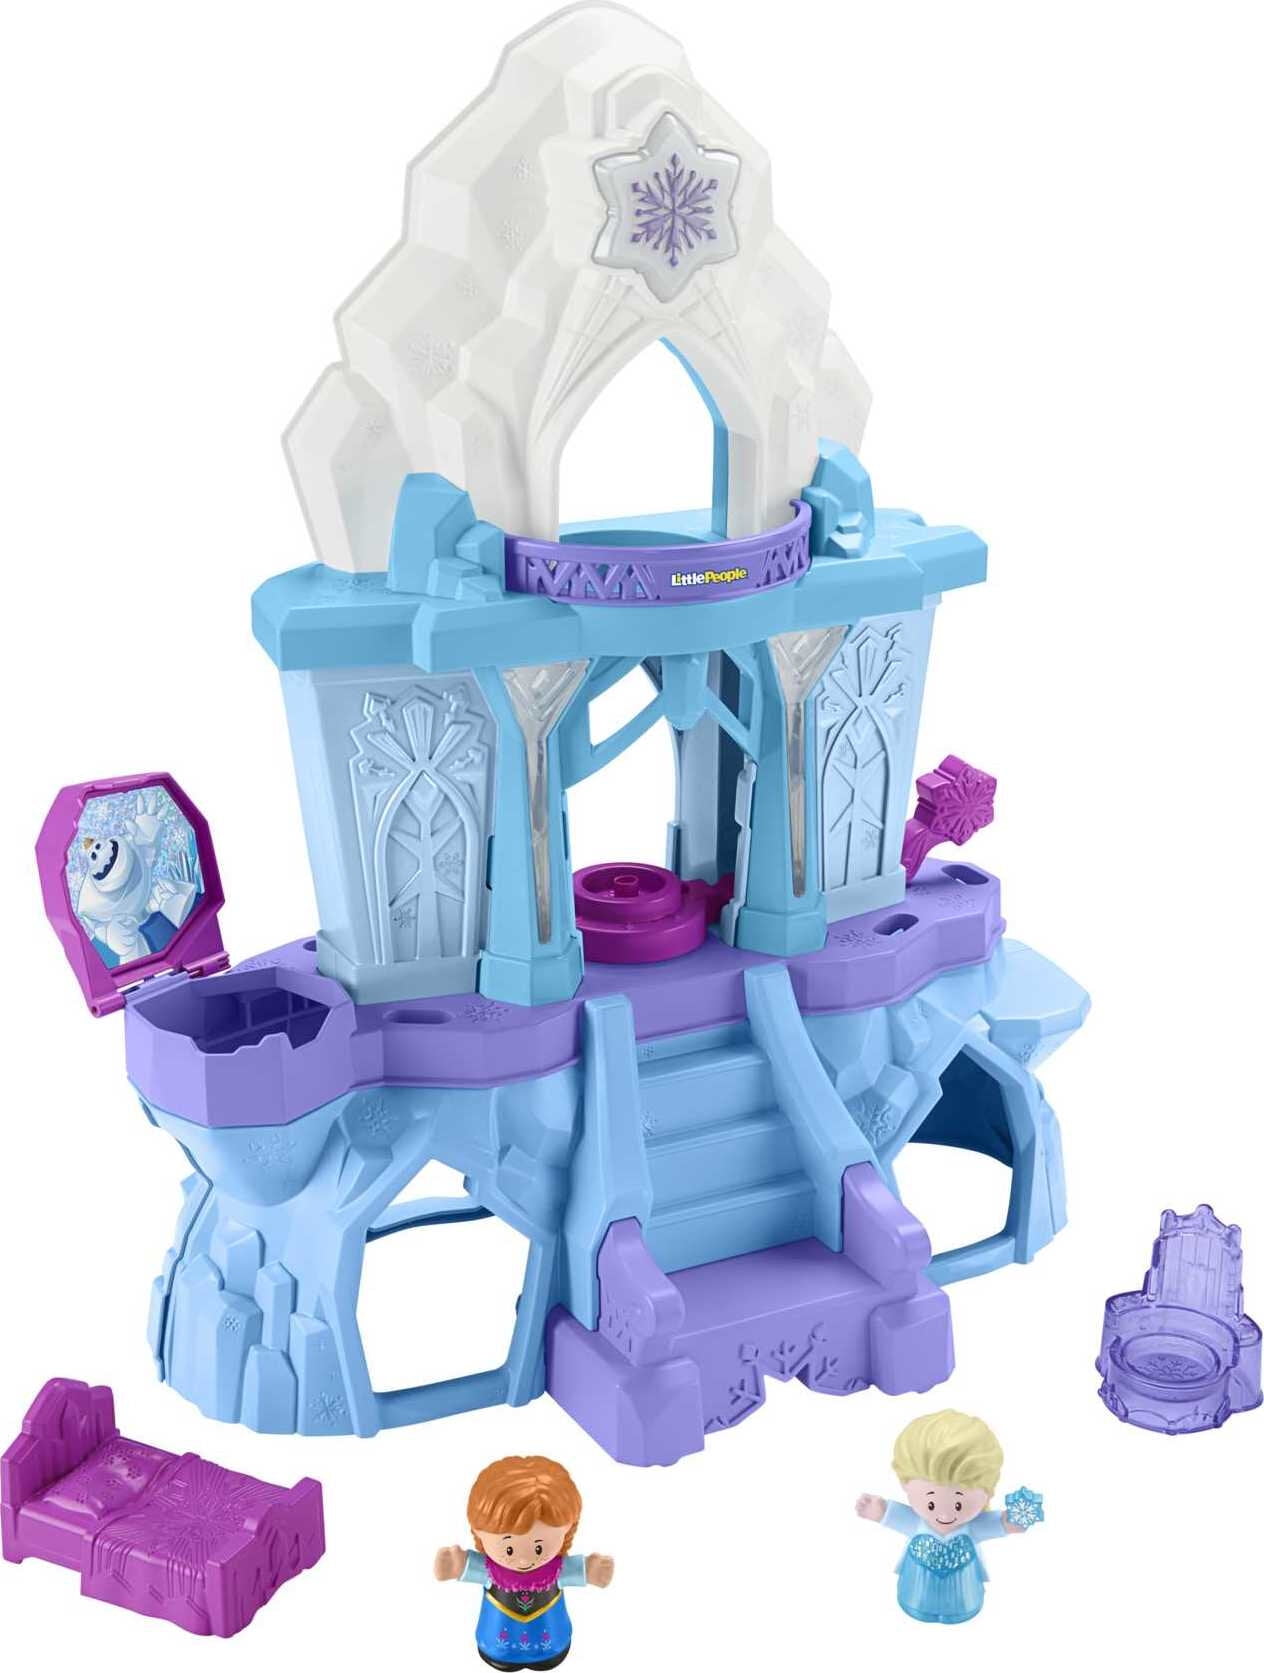 Fisher Price Little People chair throne prince princess palace castle furniture 